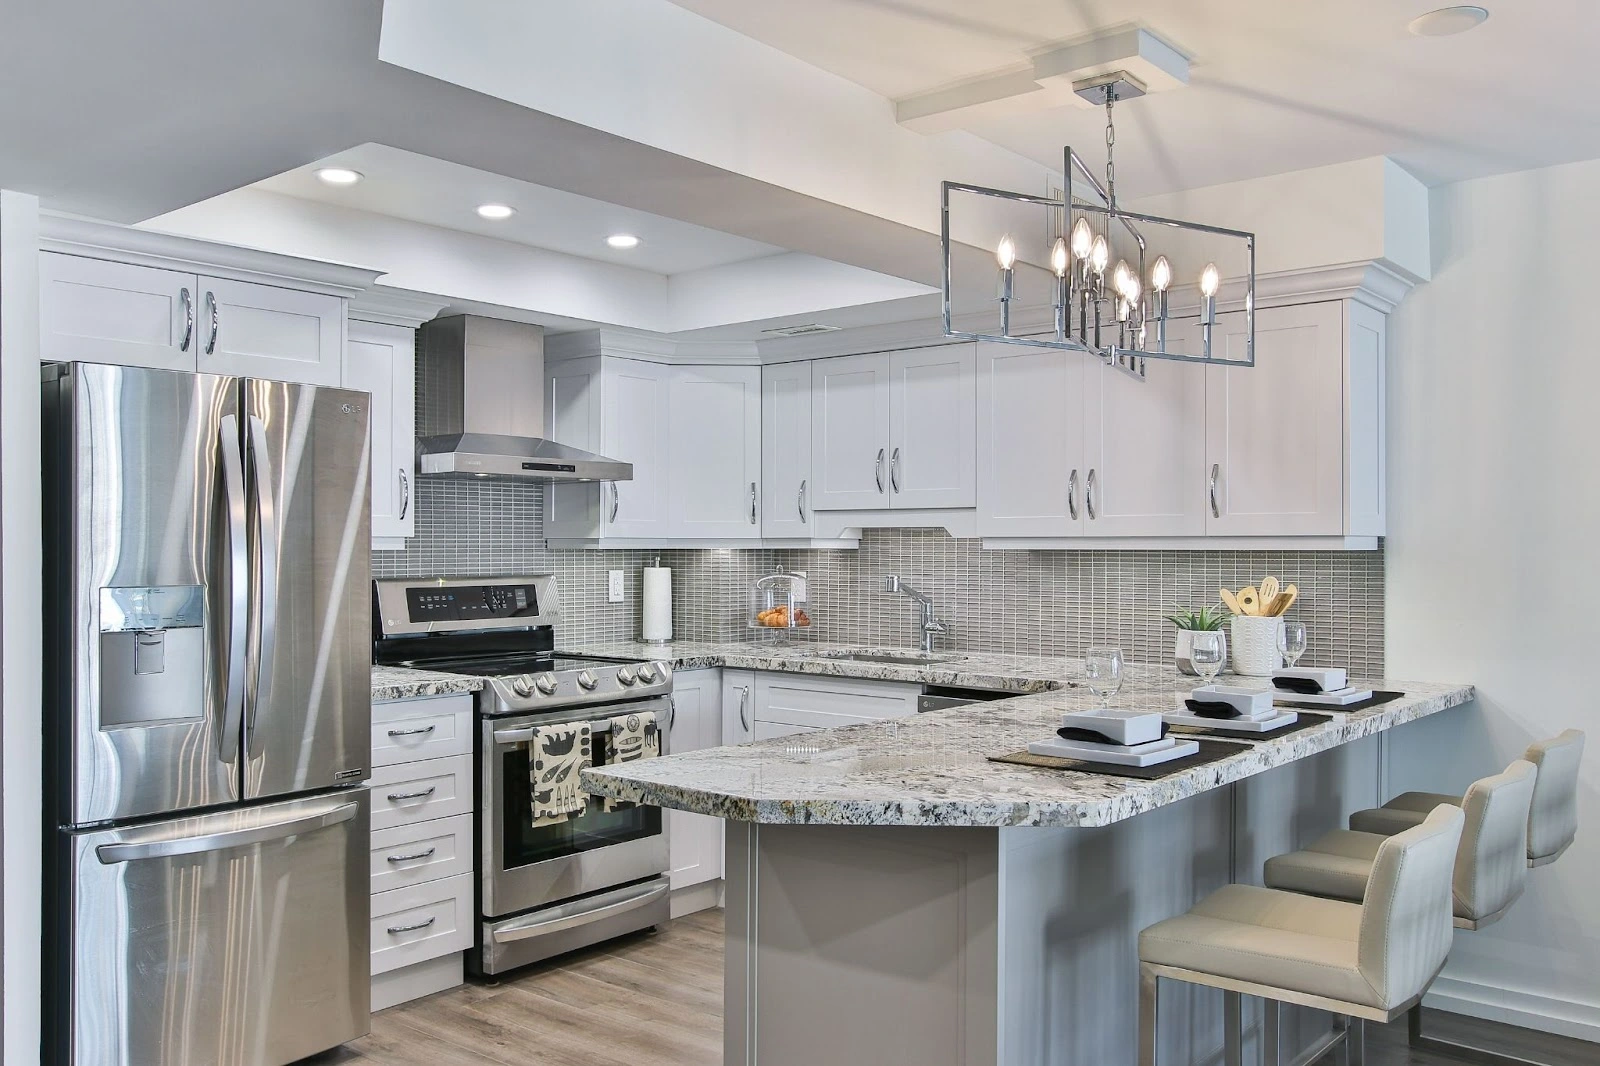 All white is the top kitchen countertop color trend in 2023.